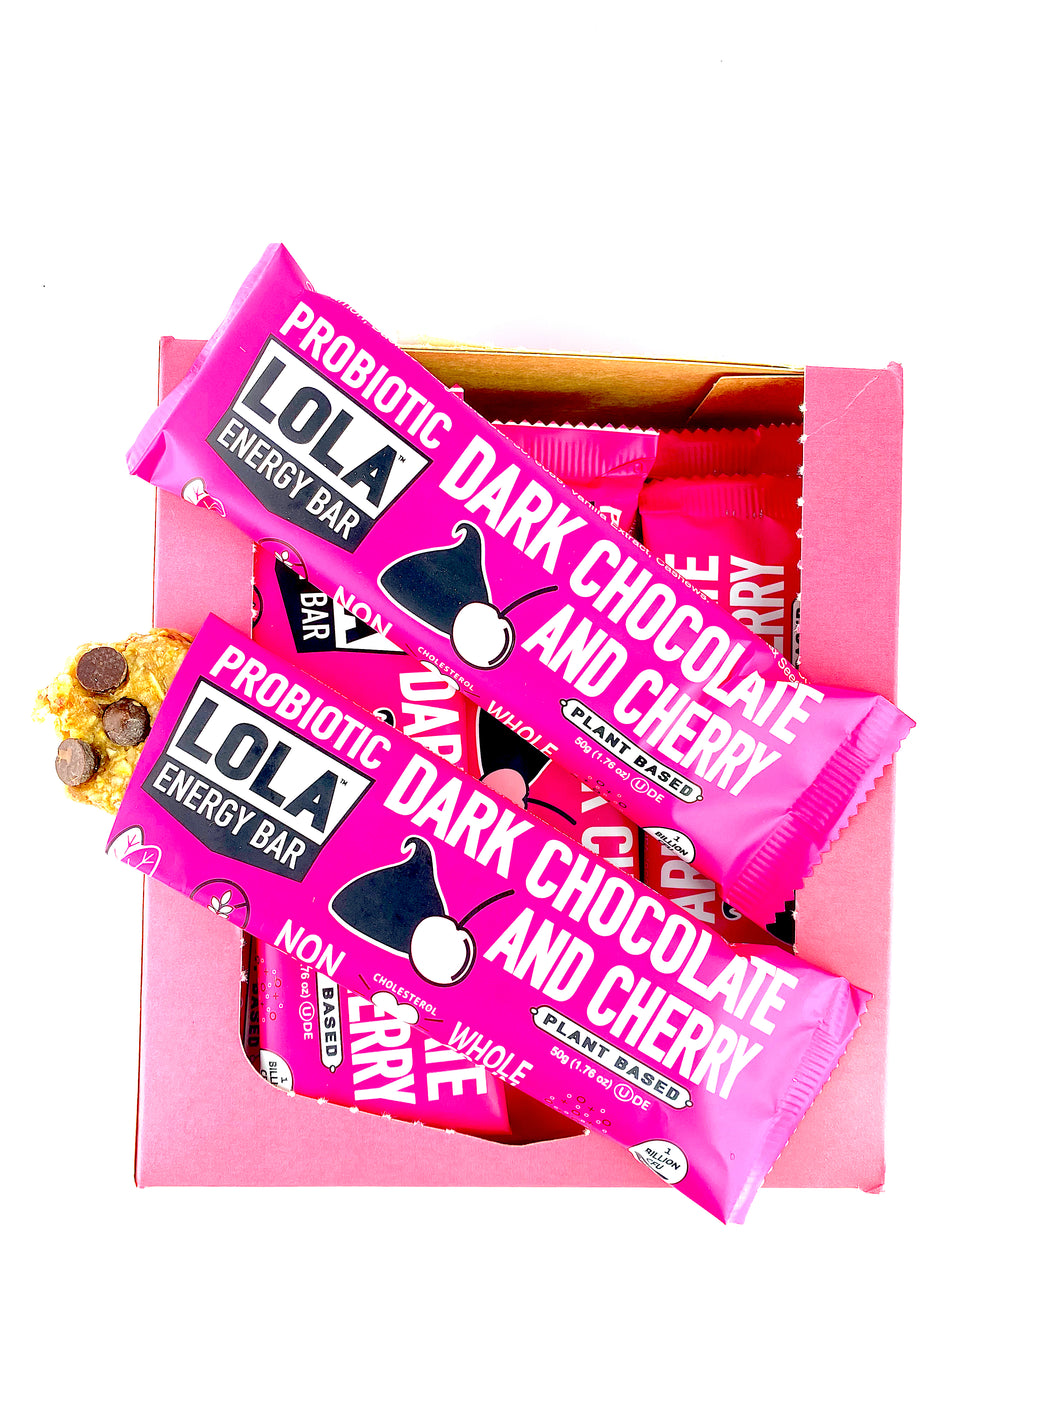 box of dark chocolate cherry bars with bars sticking out, one is partially unwrapped